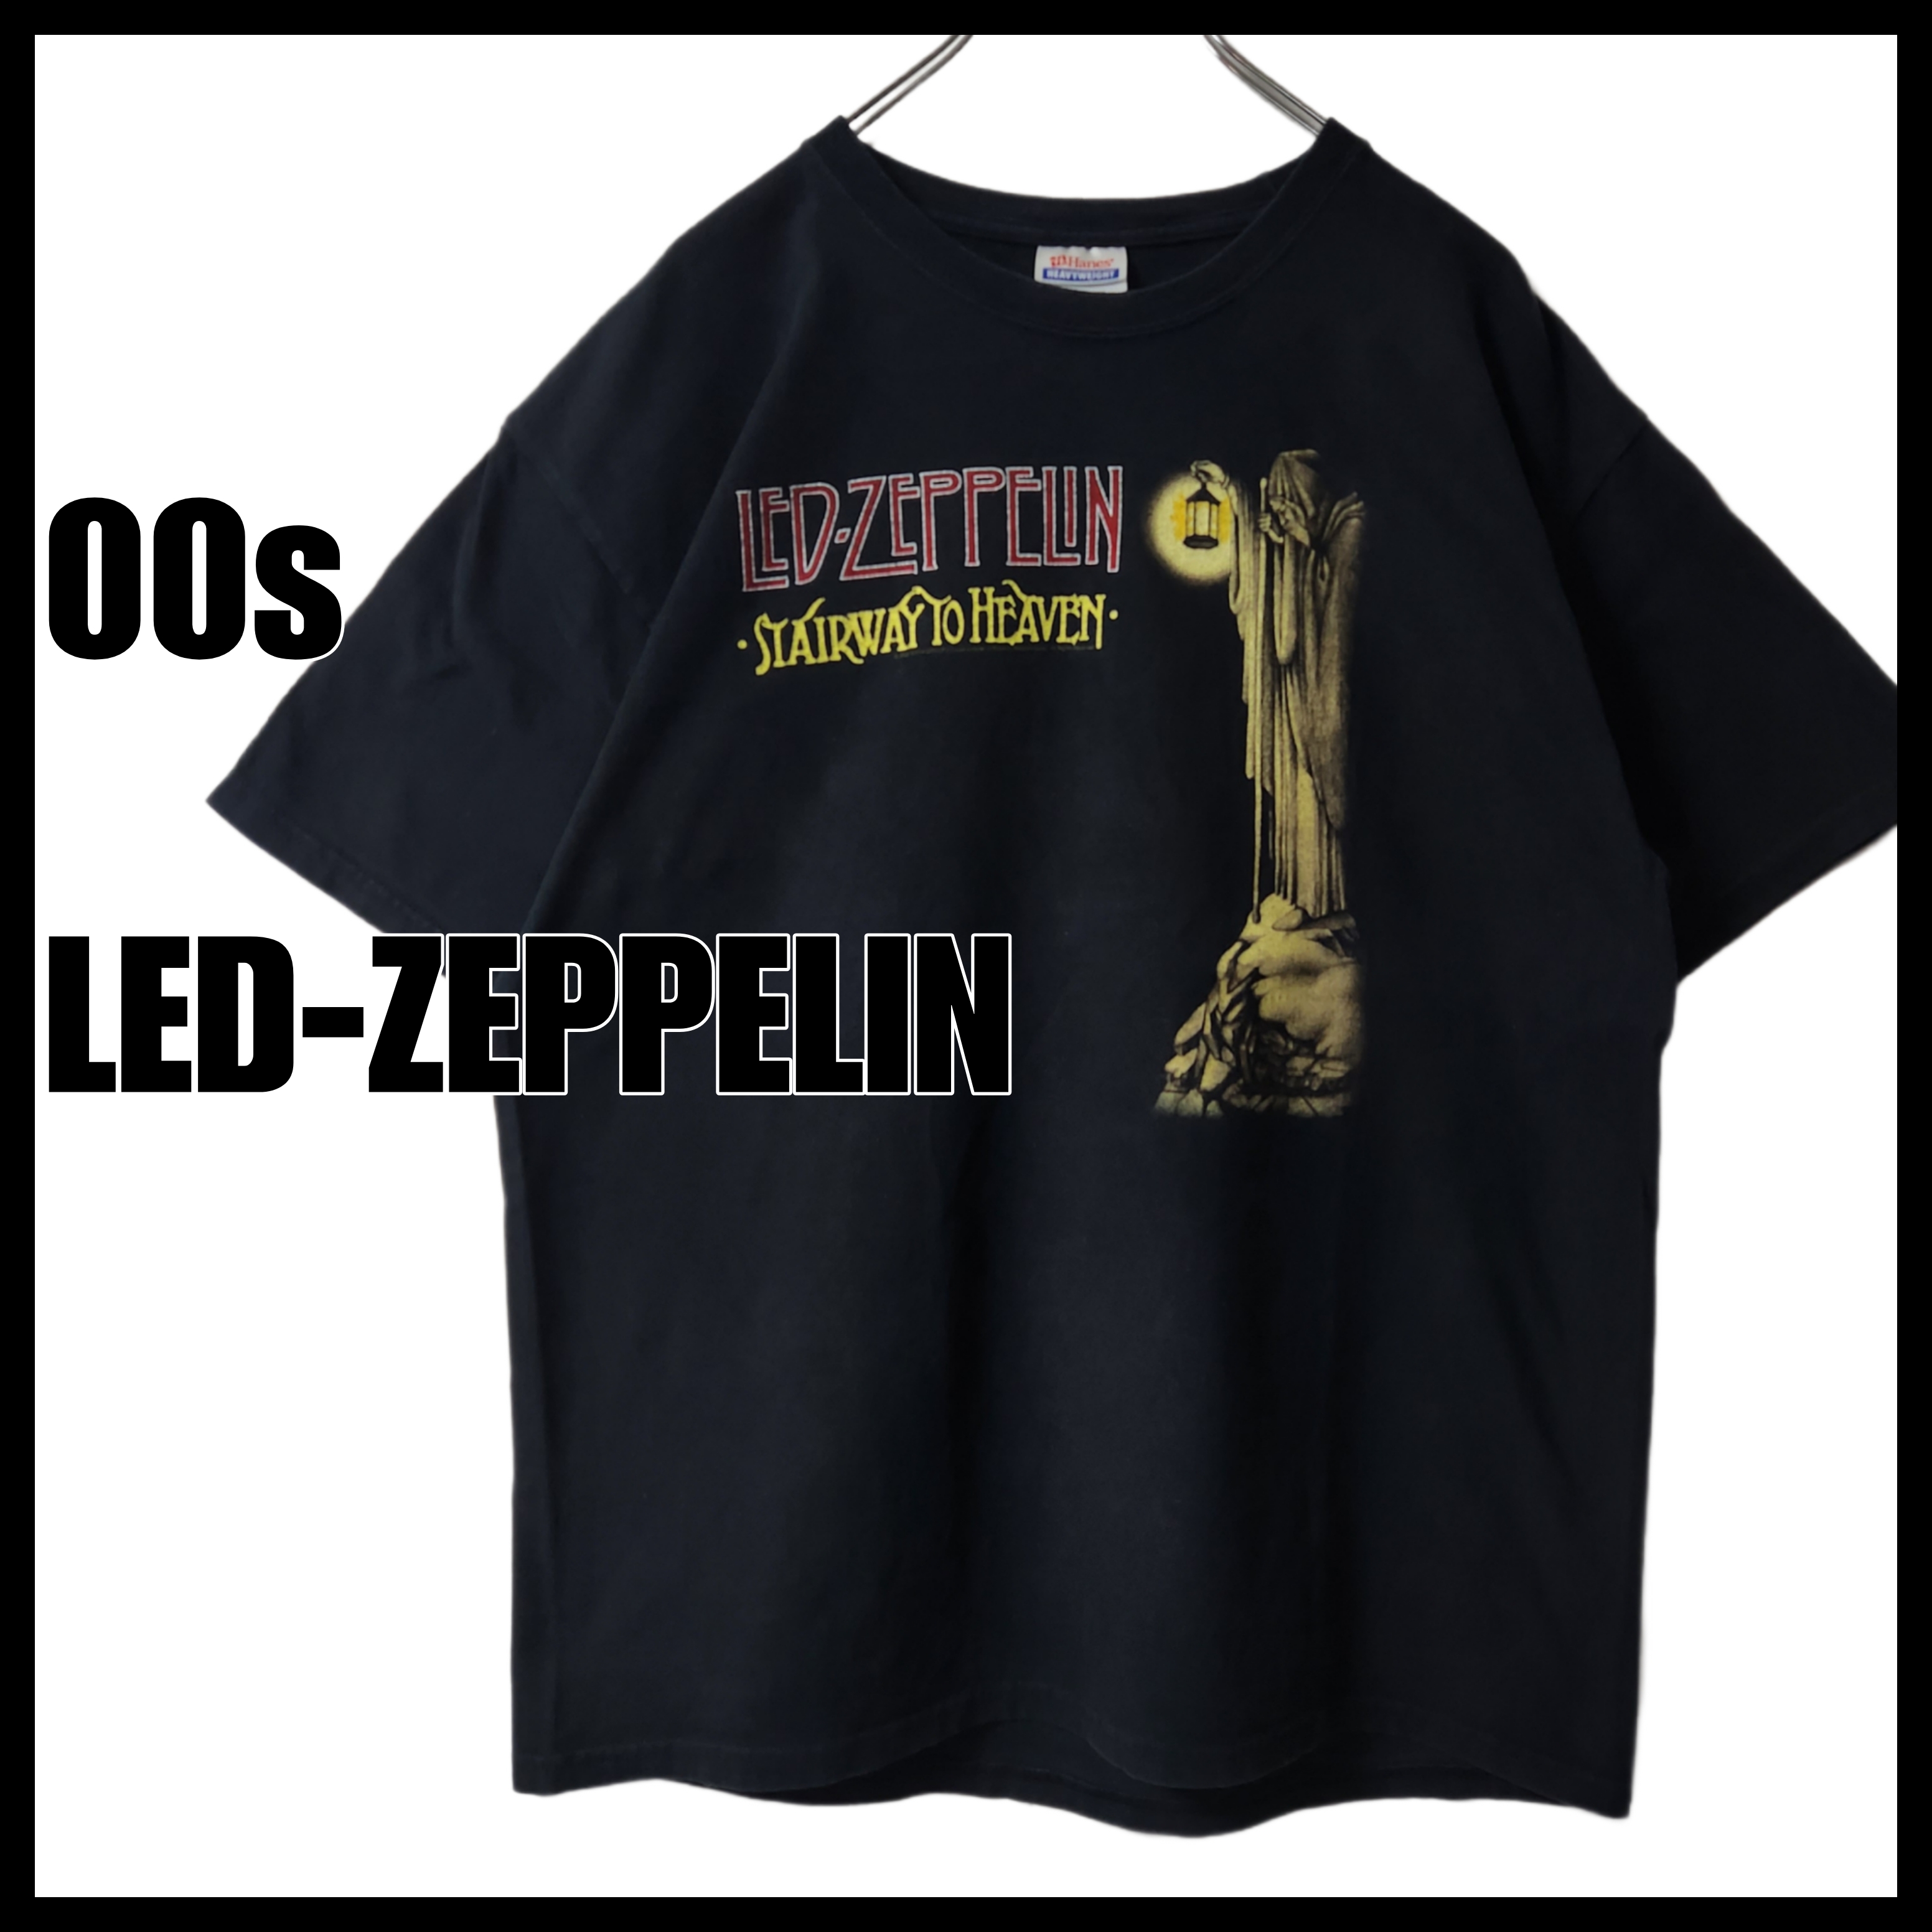 20cmLed Zeppelin Tシャツ 両面プリント 00s